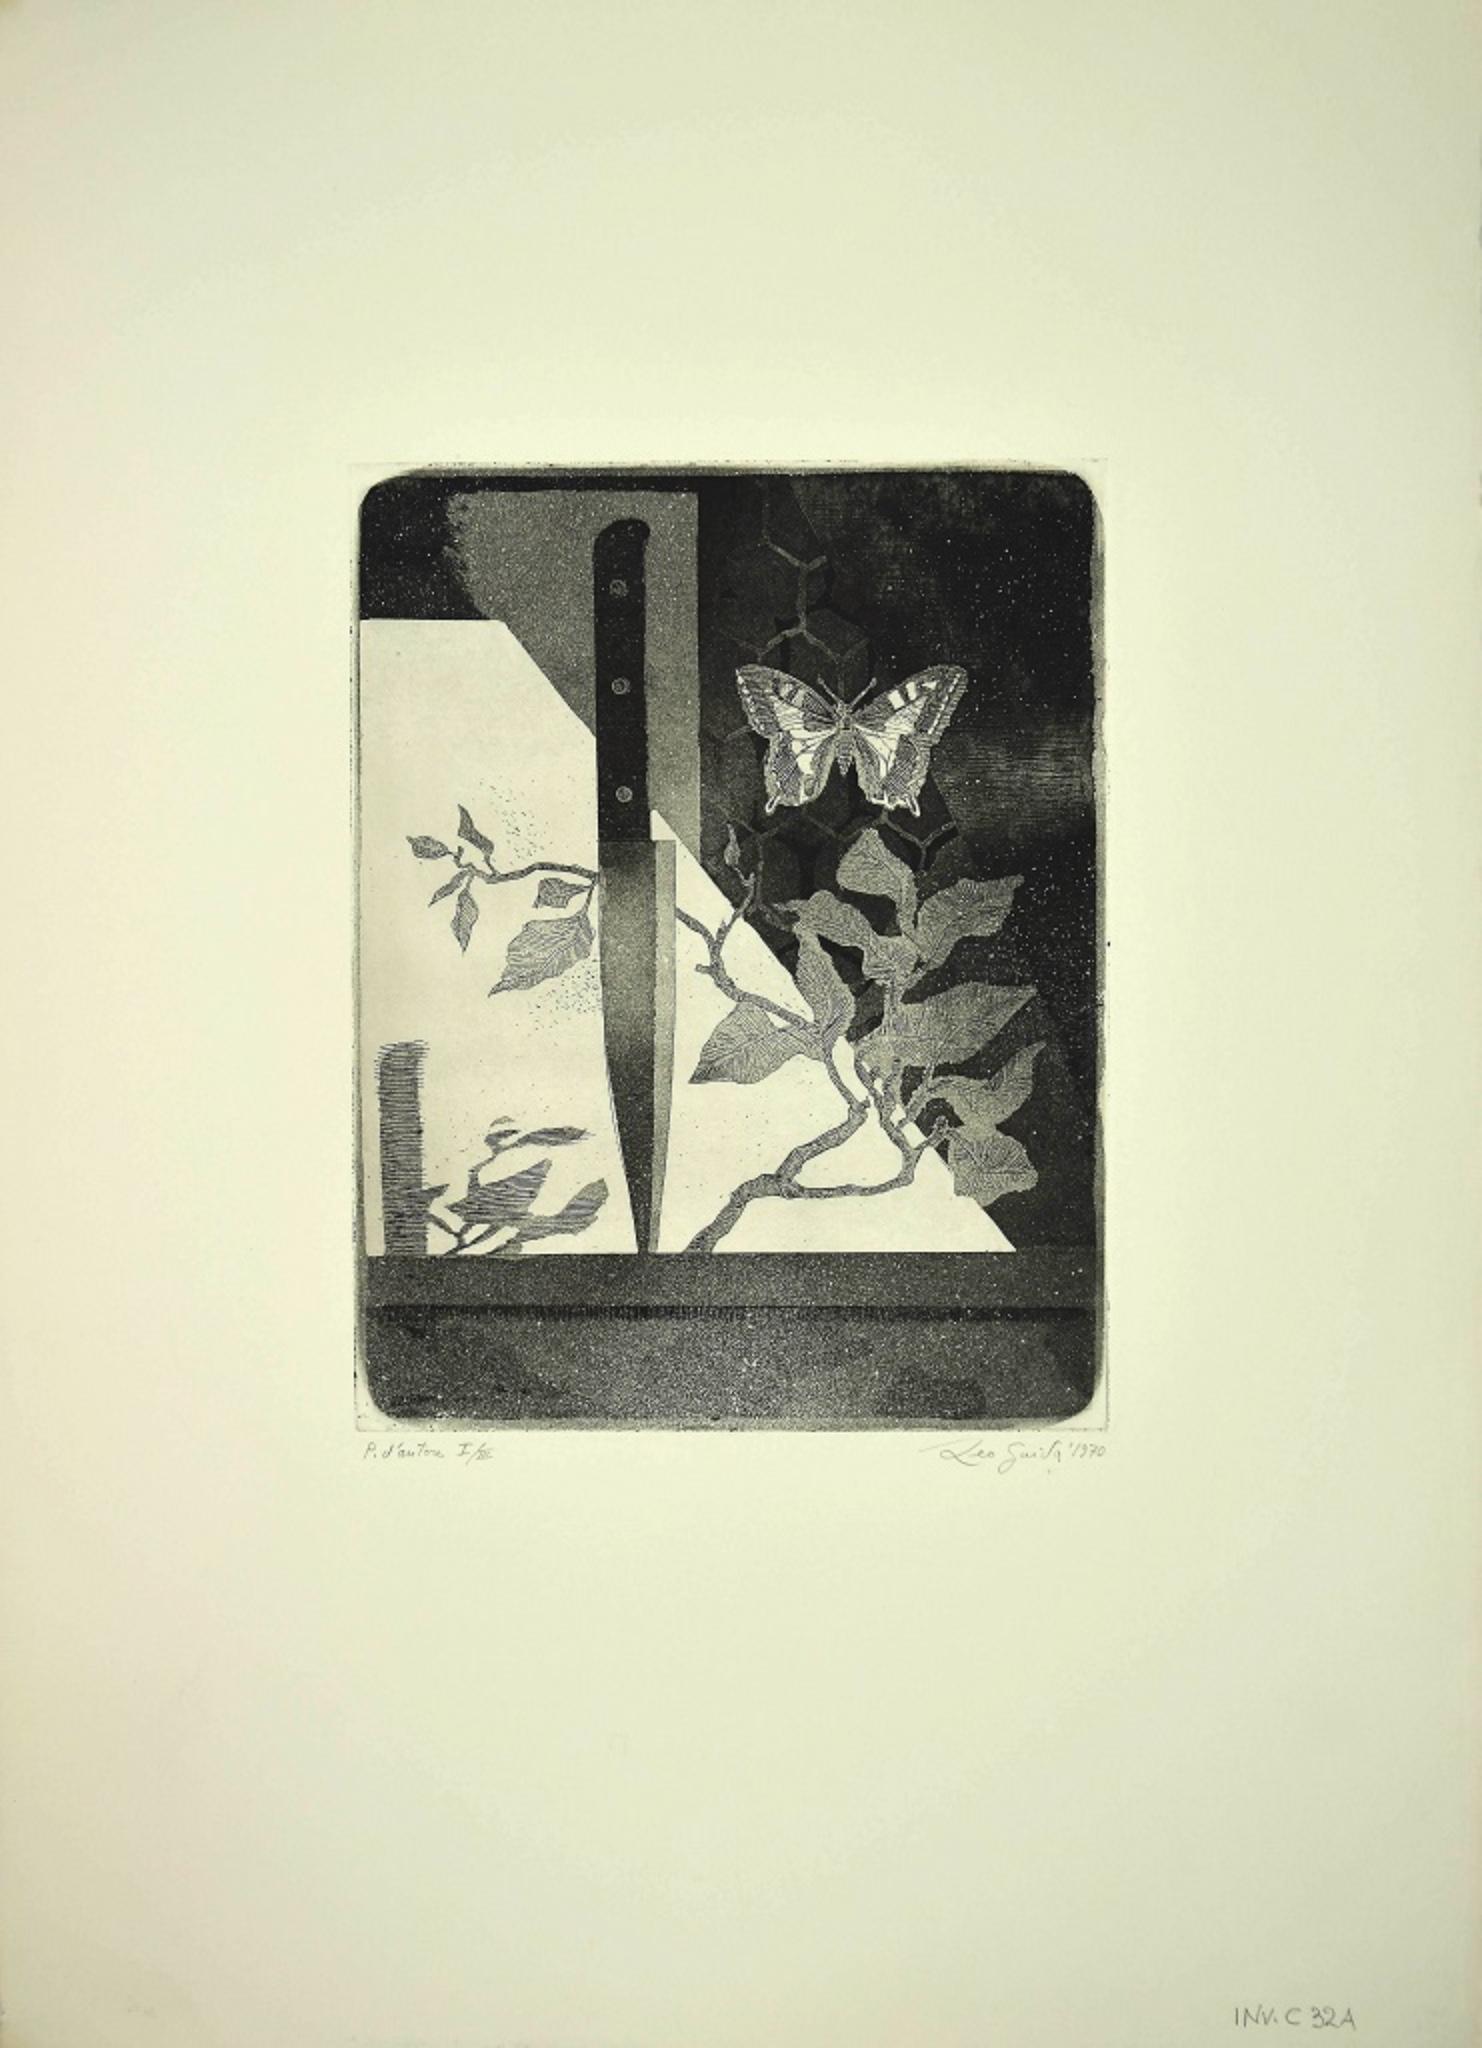 Buttefly and Knife is an original Contemporary artwork realized in 1970 by the italian artist Leo Guida.

Original Etching on Fabriano paper.Image Dimensions: 32 x 25 cm

Dated and hand-signed in pencil on the lower righ margin: Leo Guida 1970.